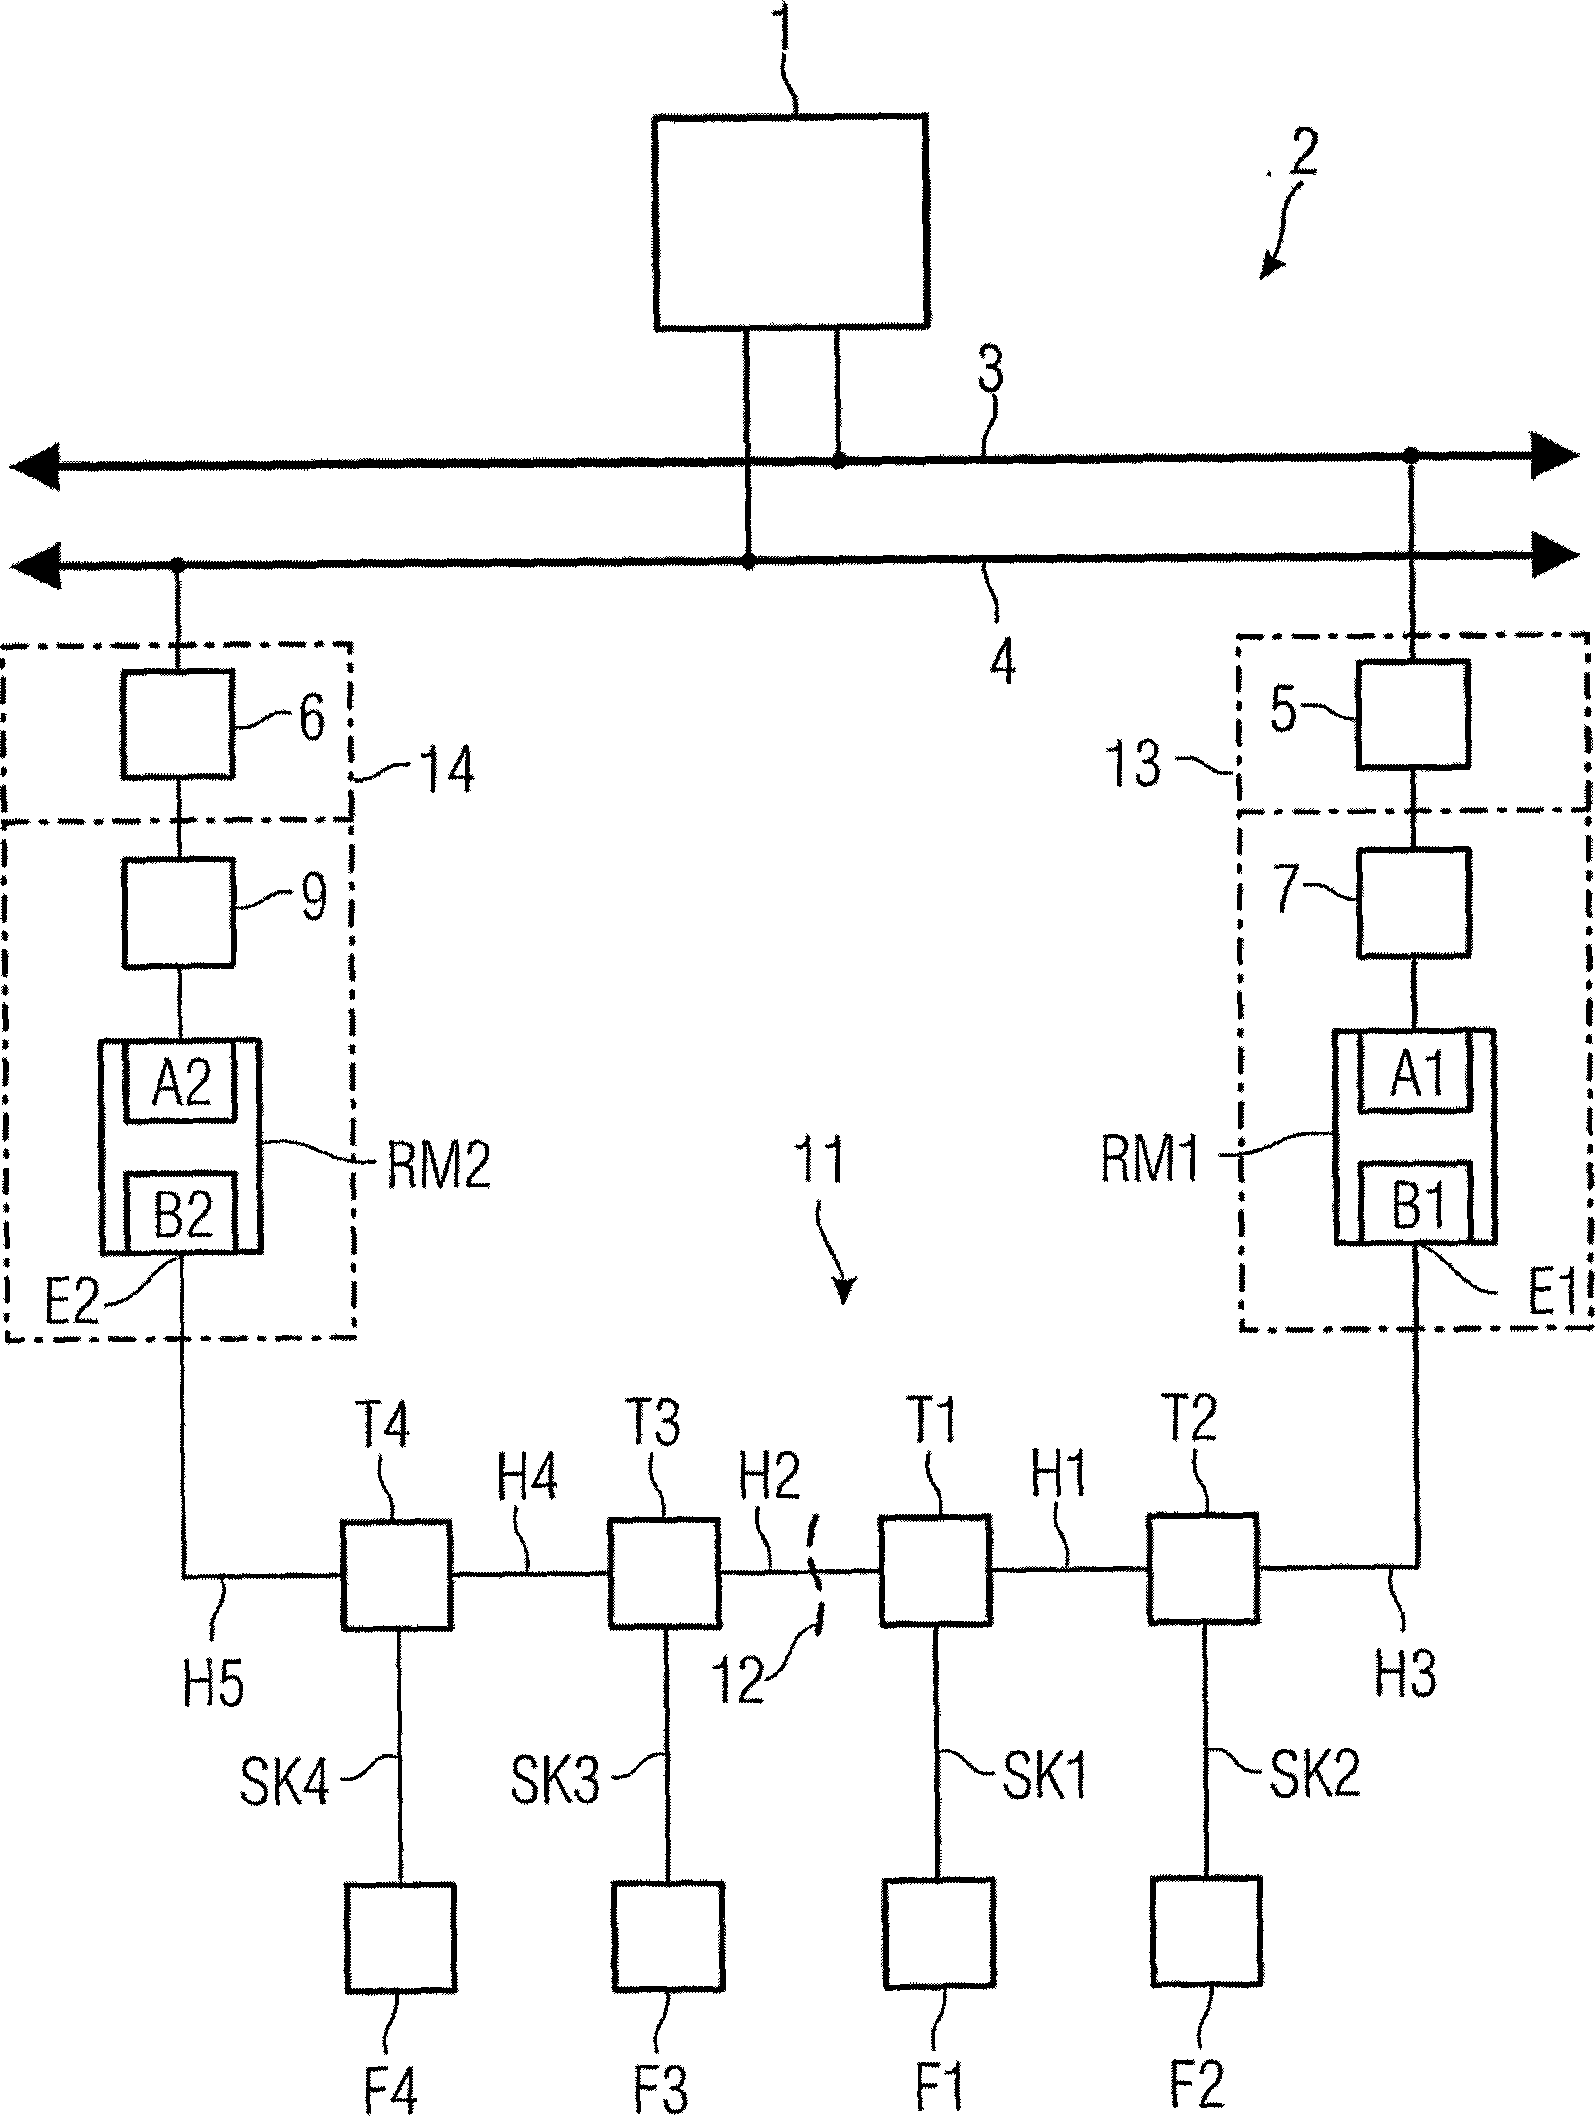 Method for operating a network